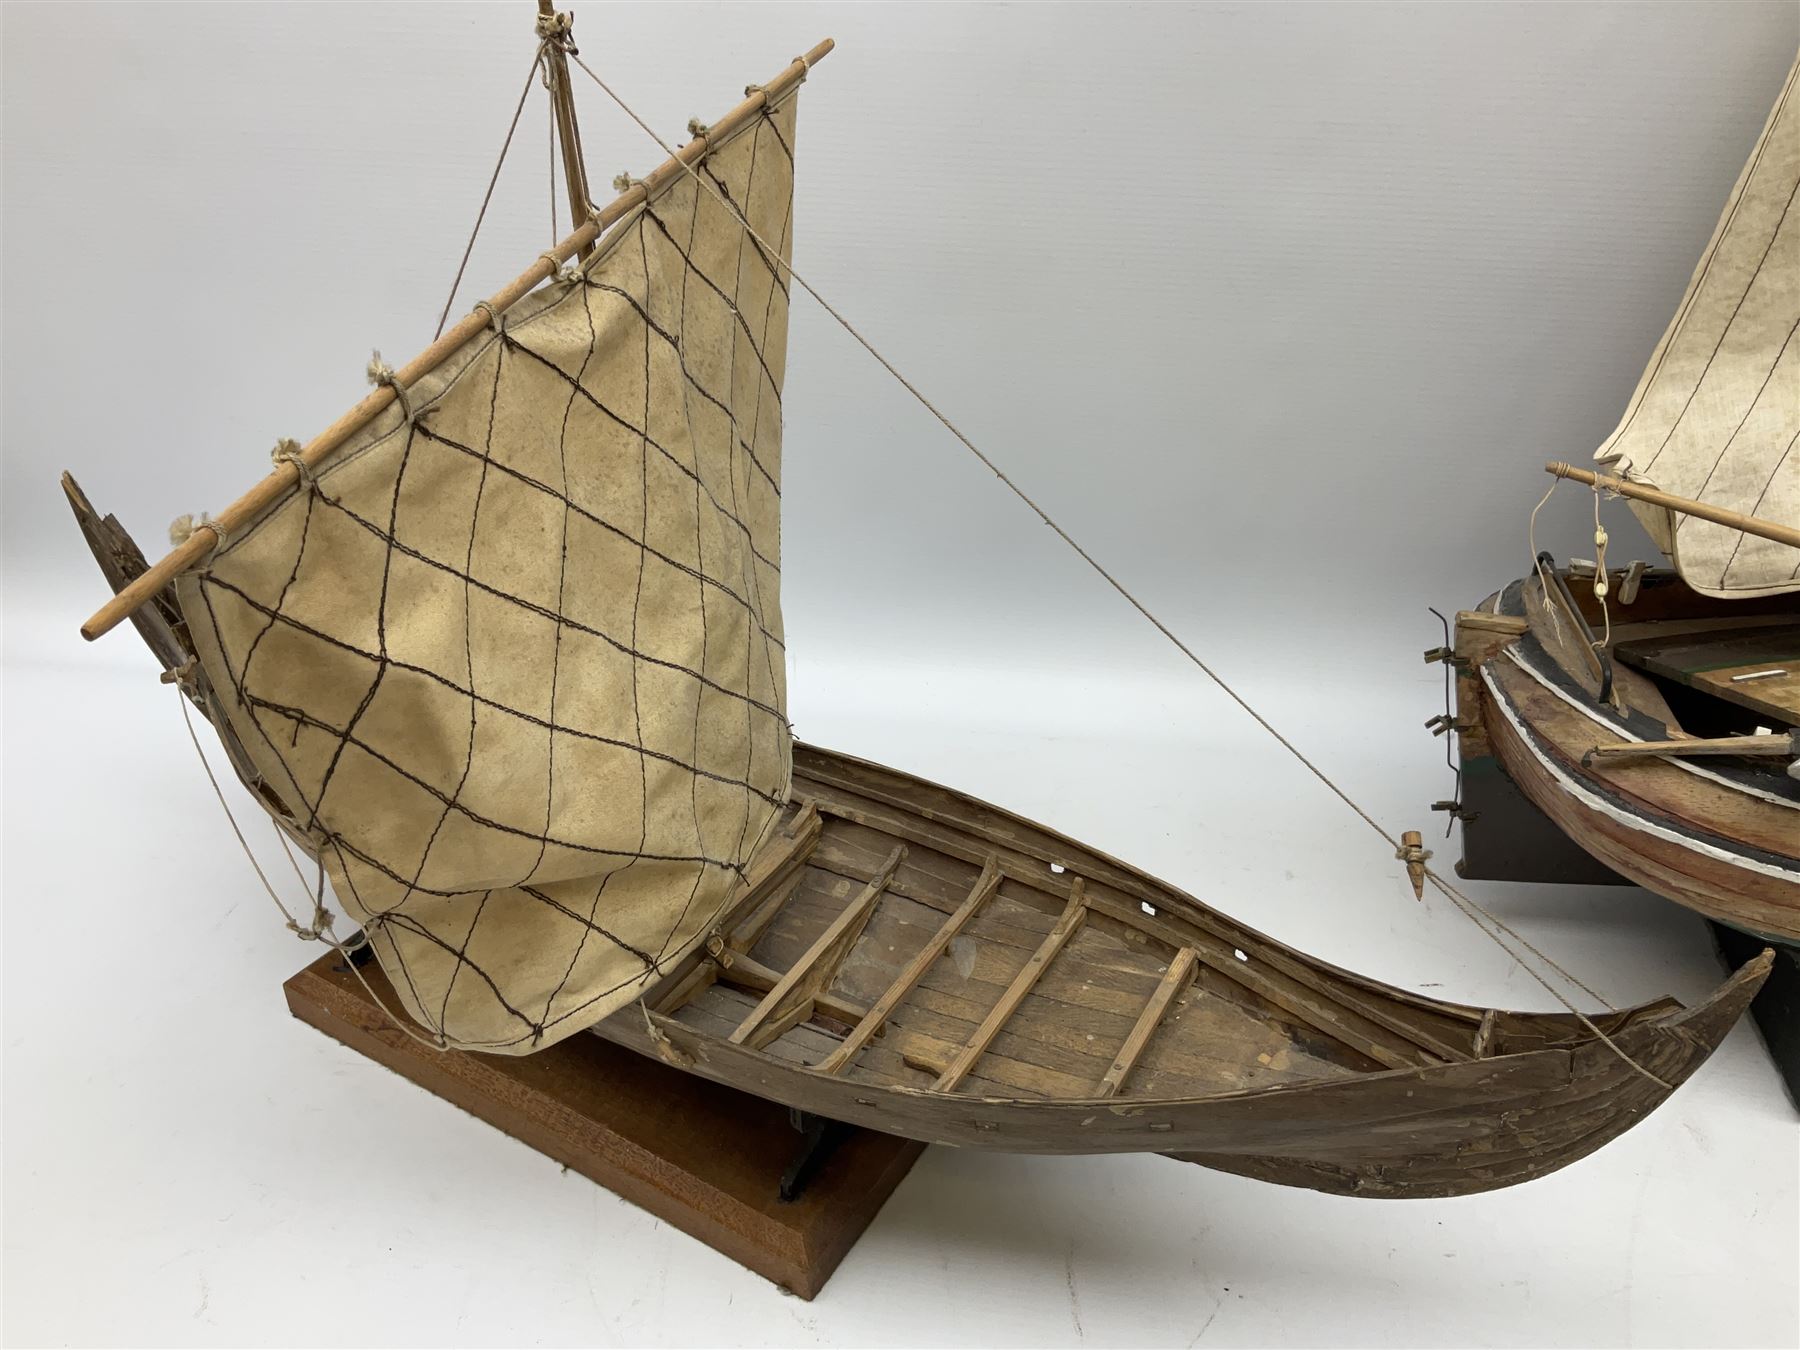 Wooden model of an exploration era ship, with three masts, the hull of ...